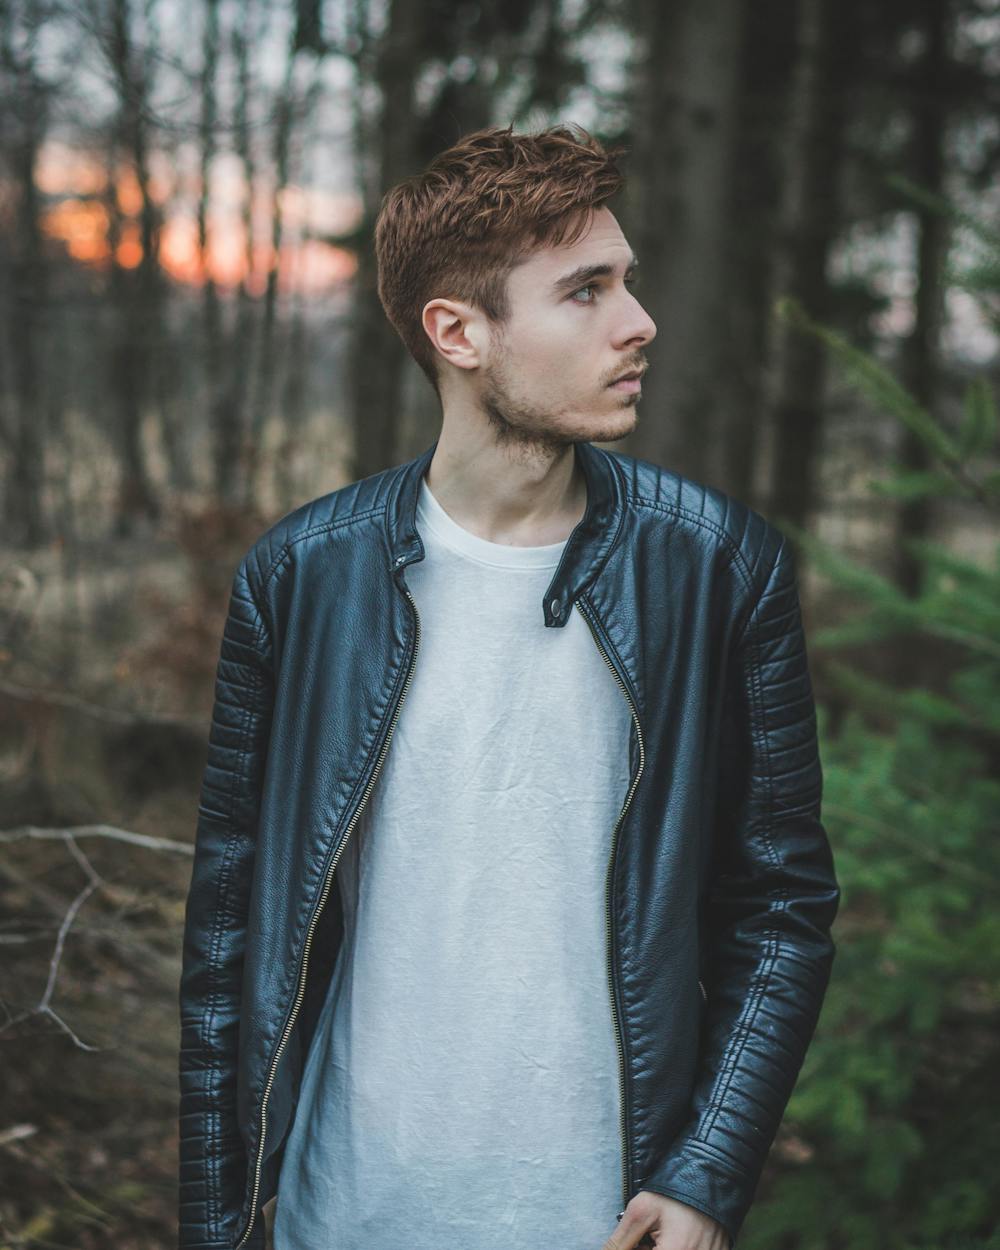 Photo of a young man in the woods. | Photo: Pexels